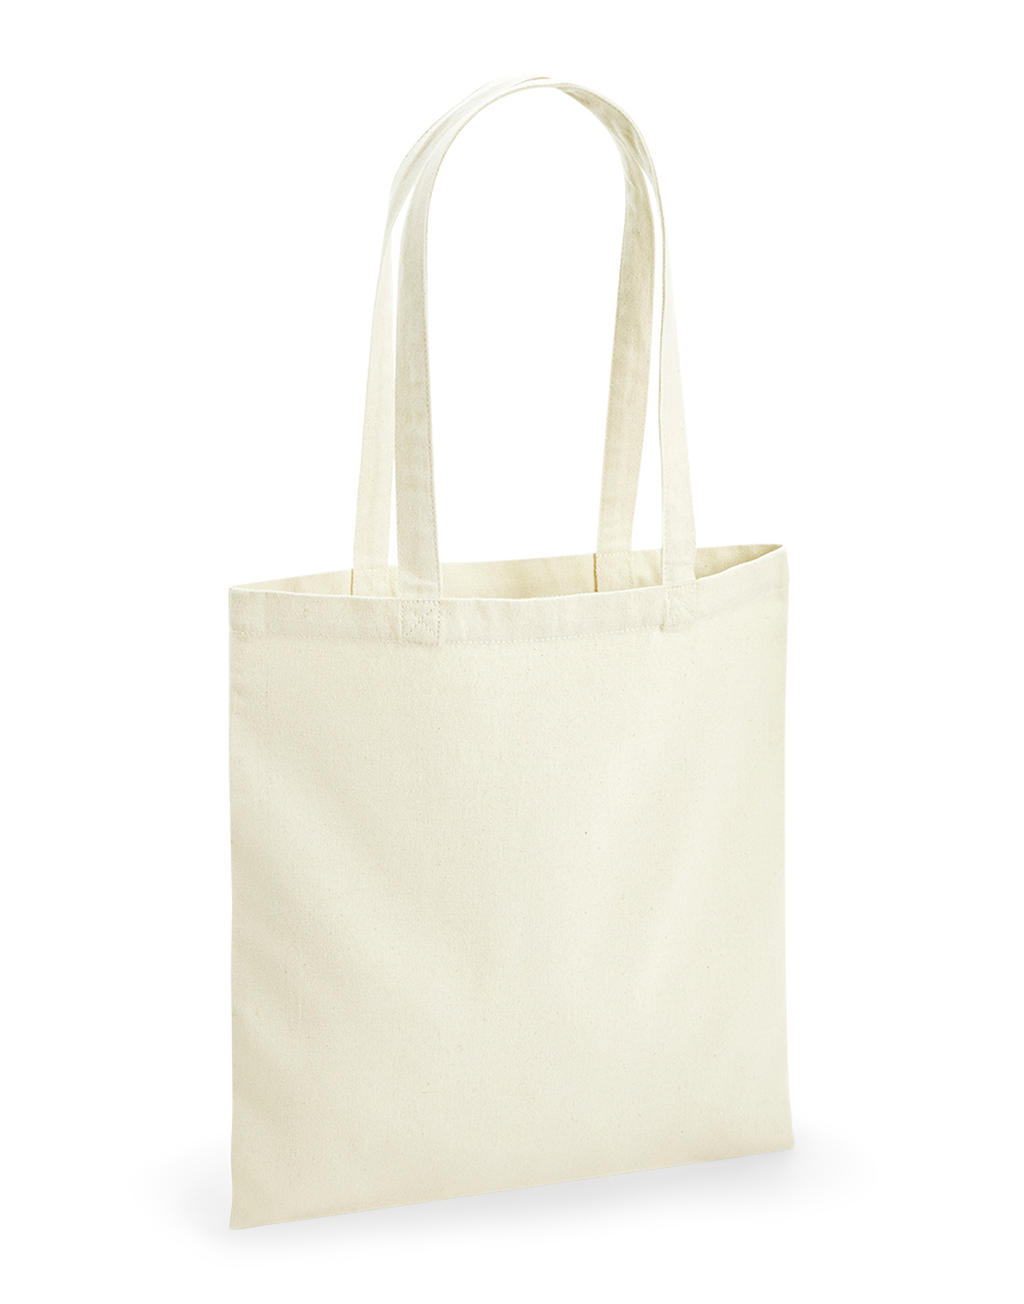  Revive Recycled Tote in Farbe Natural